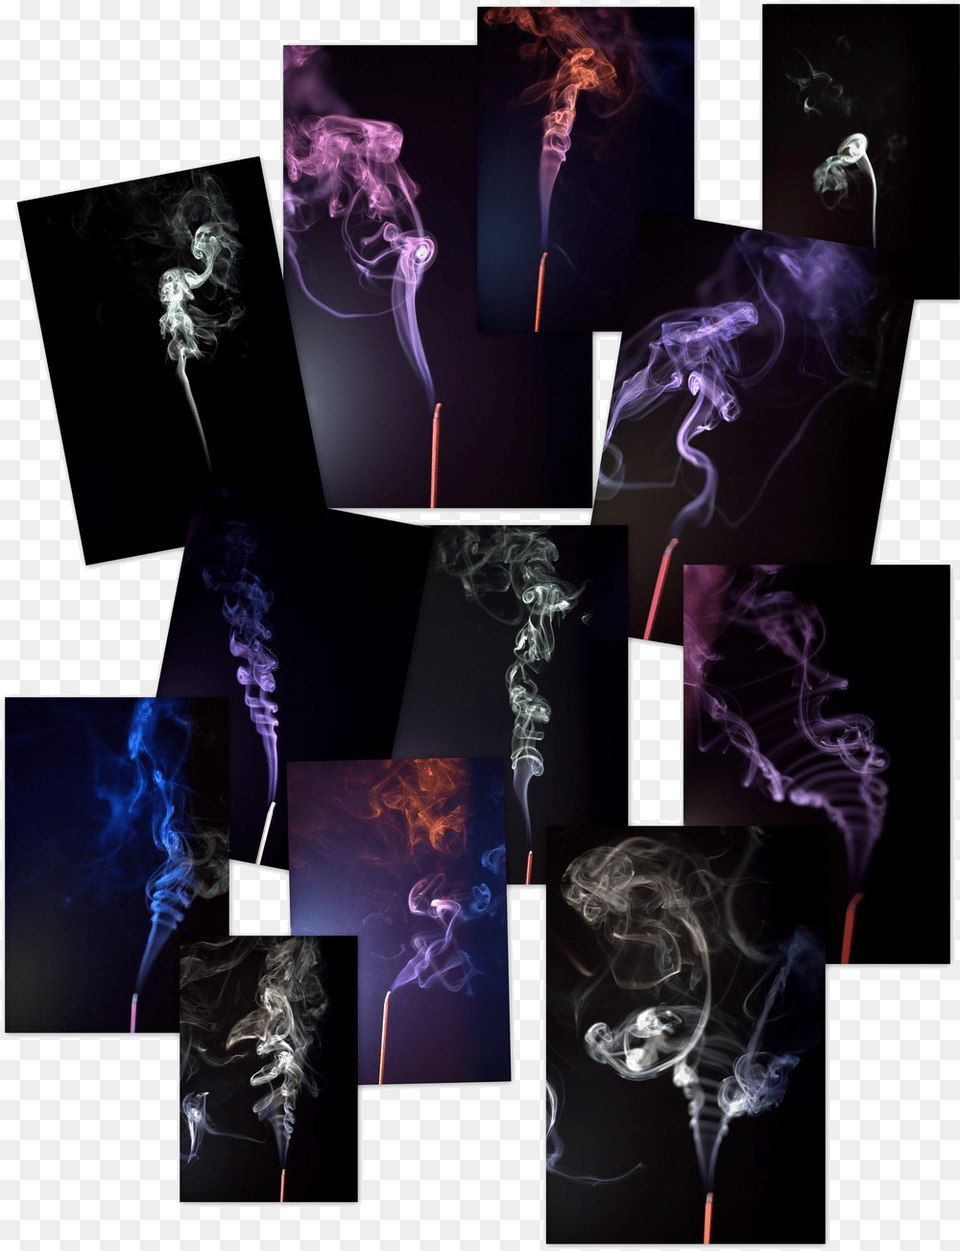 Graphic Design, Art, Collage, Smoke, Adult Png Image